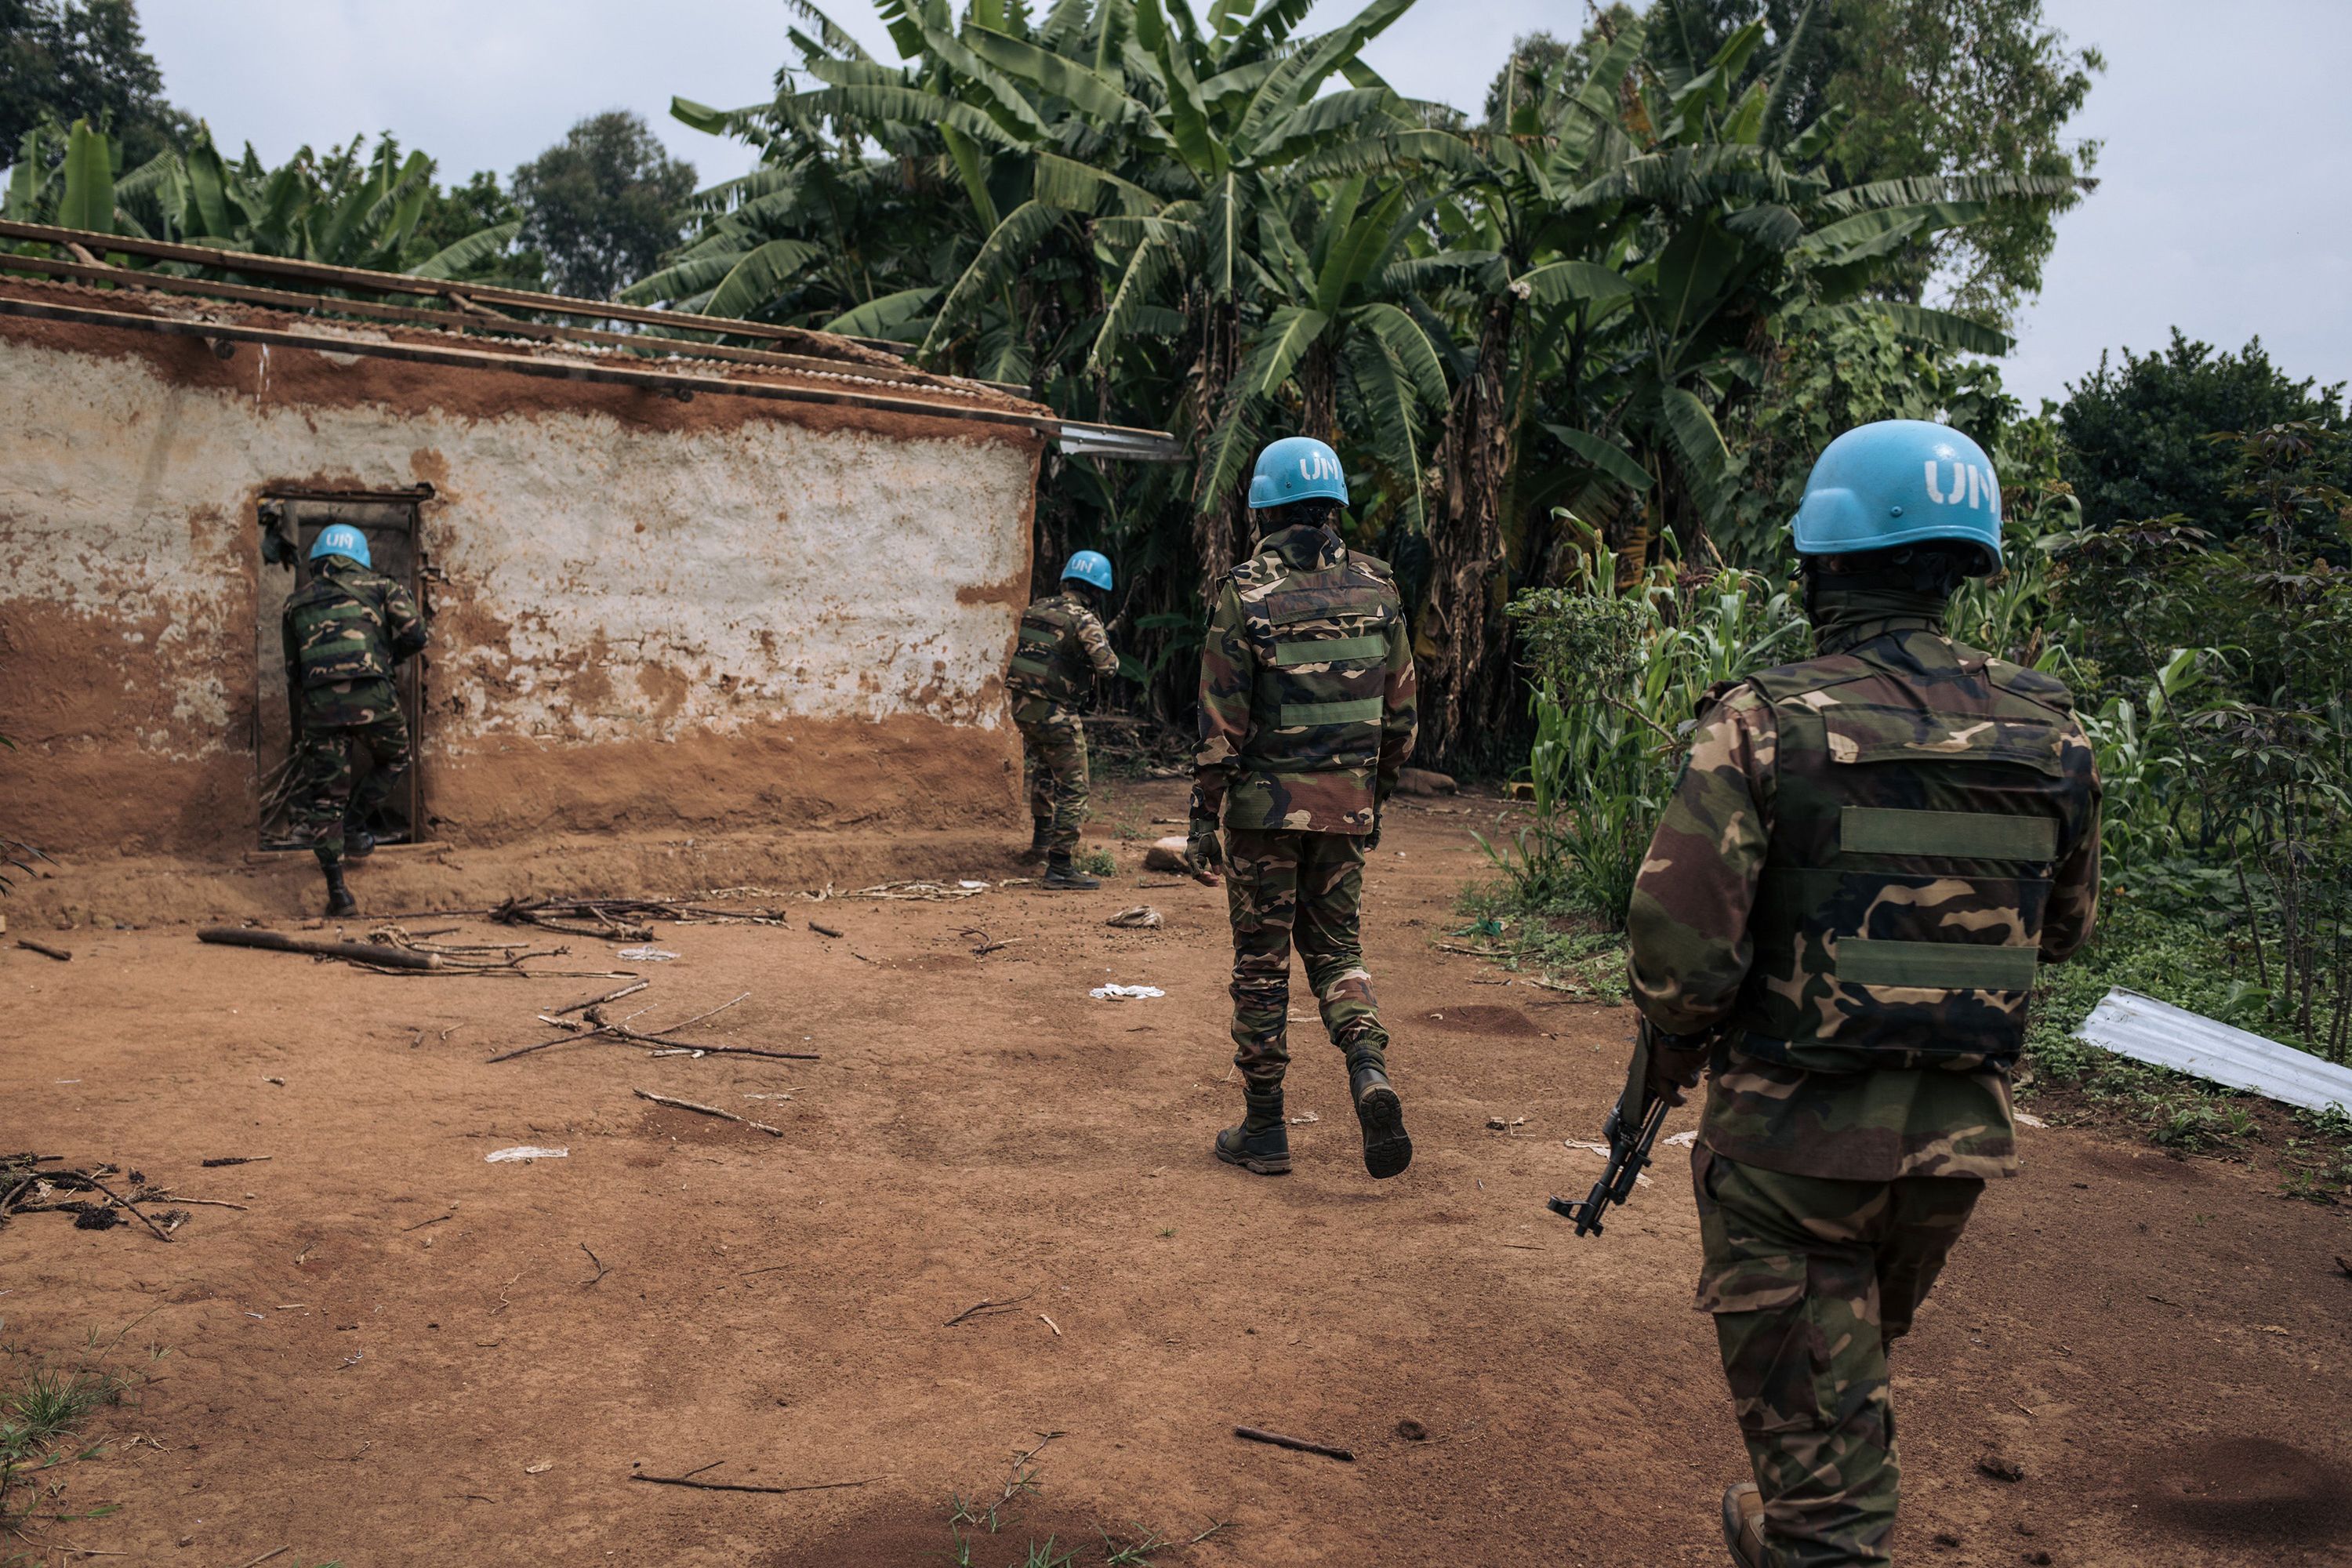 DRC President Tshisekedi tells UN peacekeepers to leave the country from  December